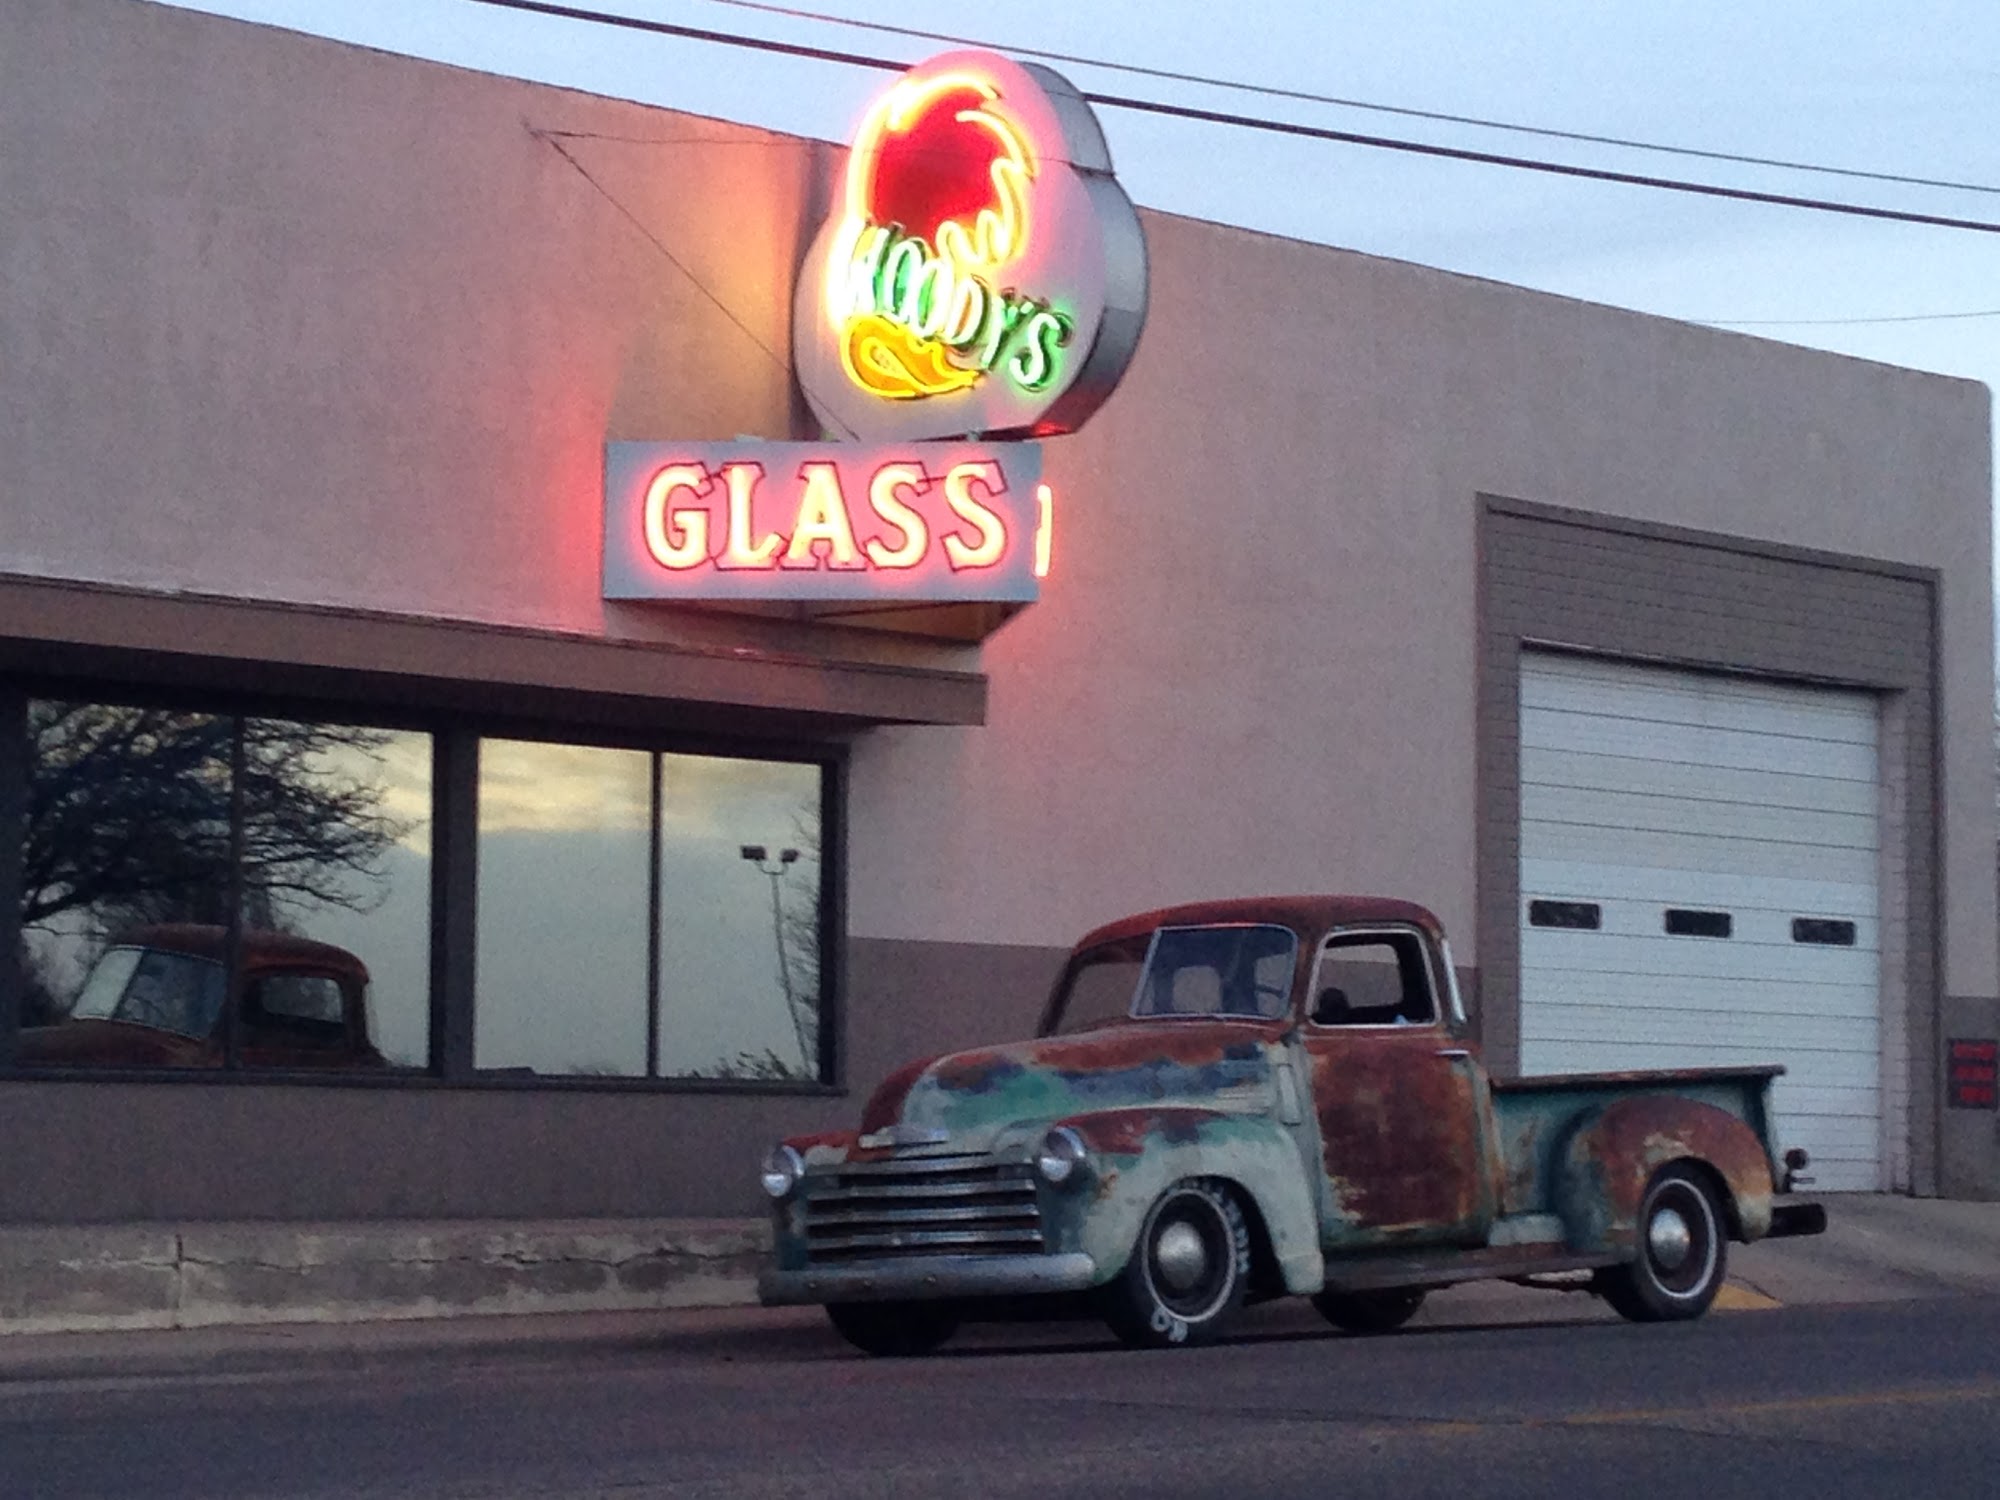 Woody's Glass Shop